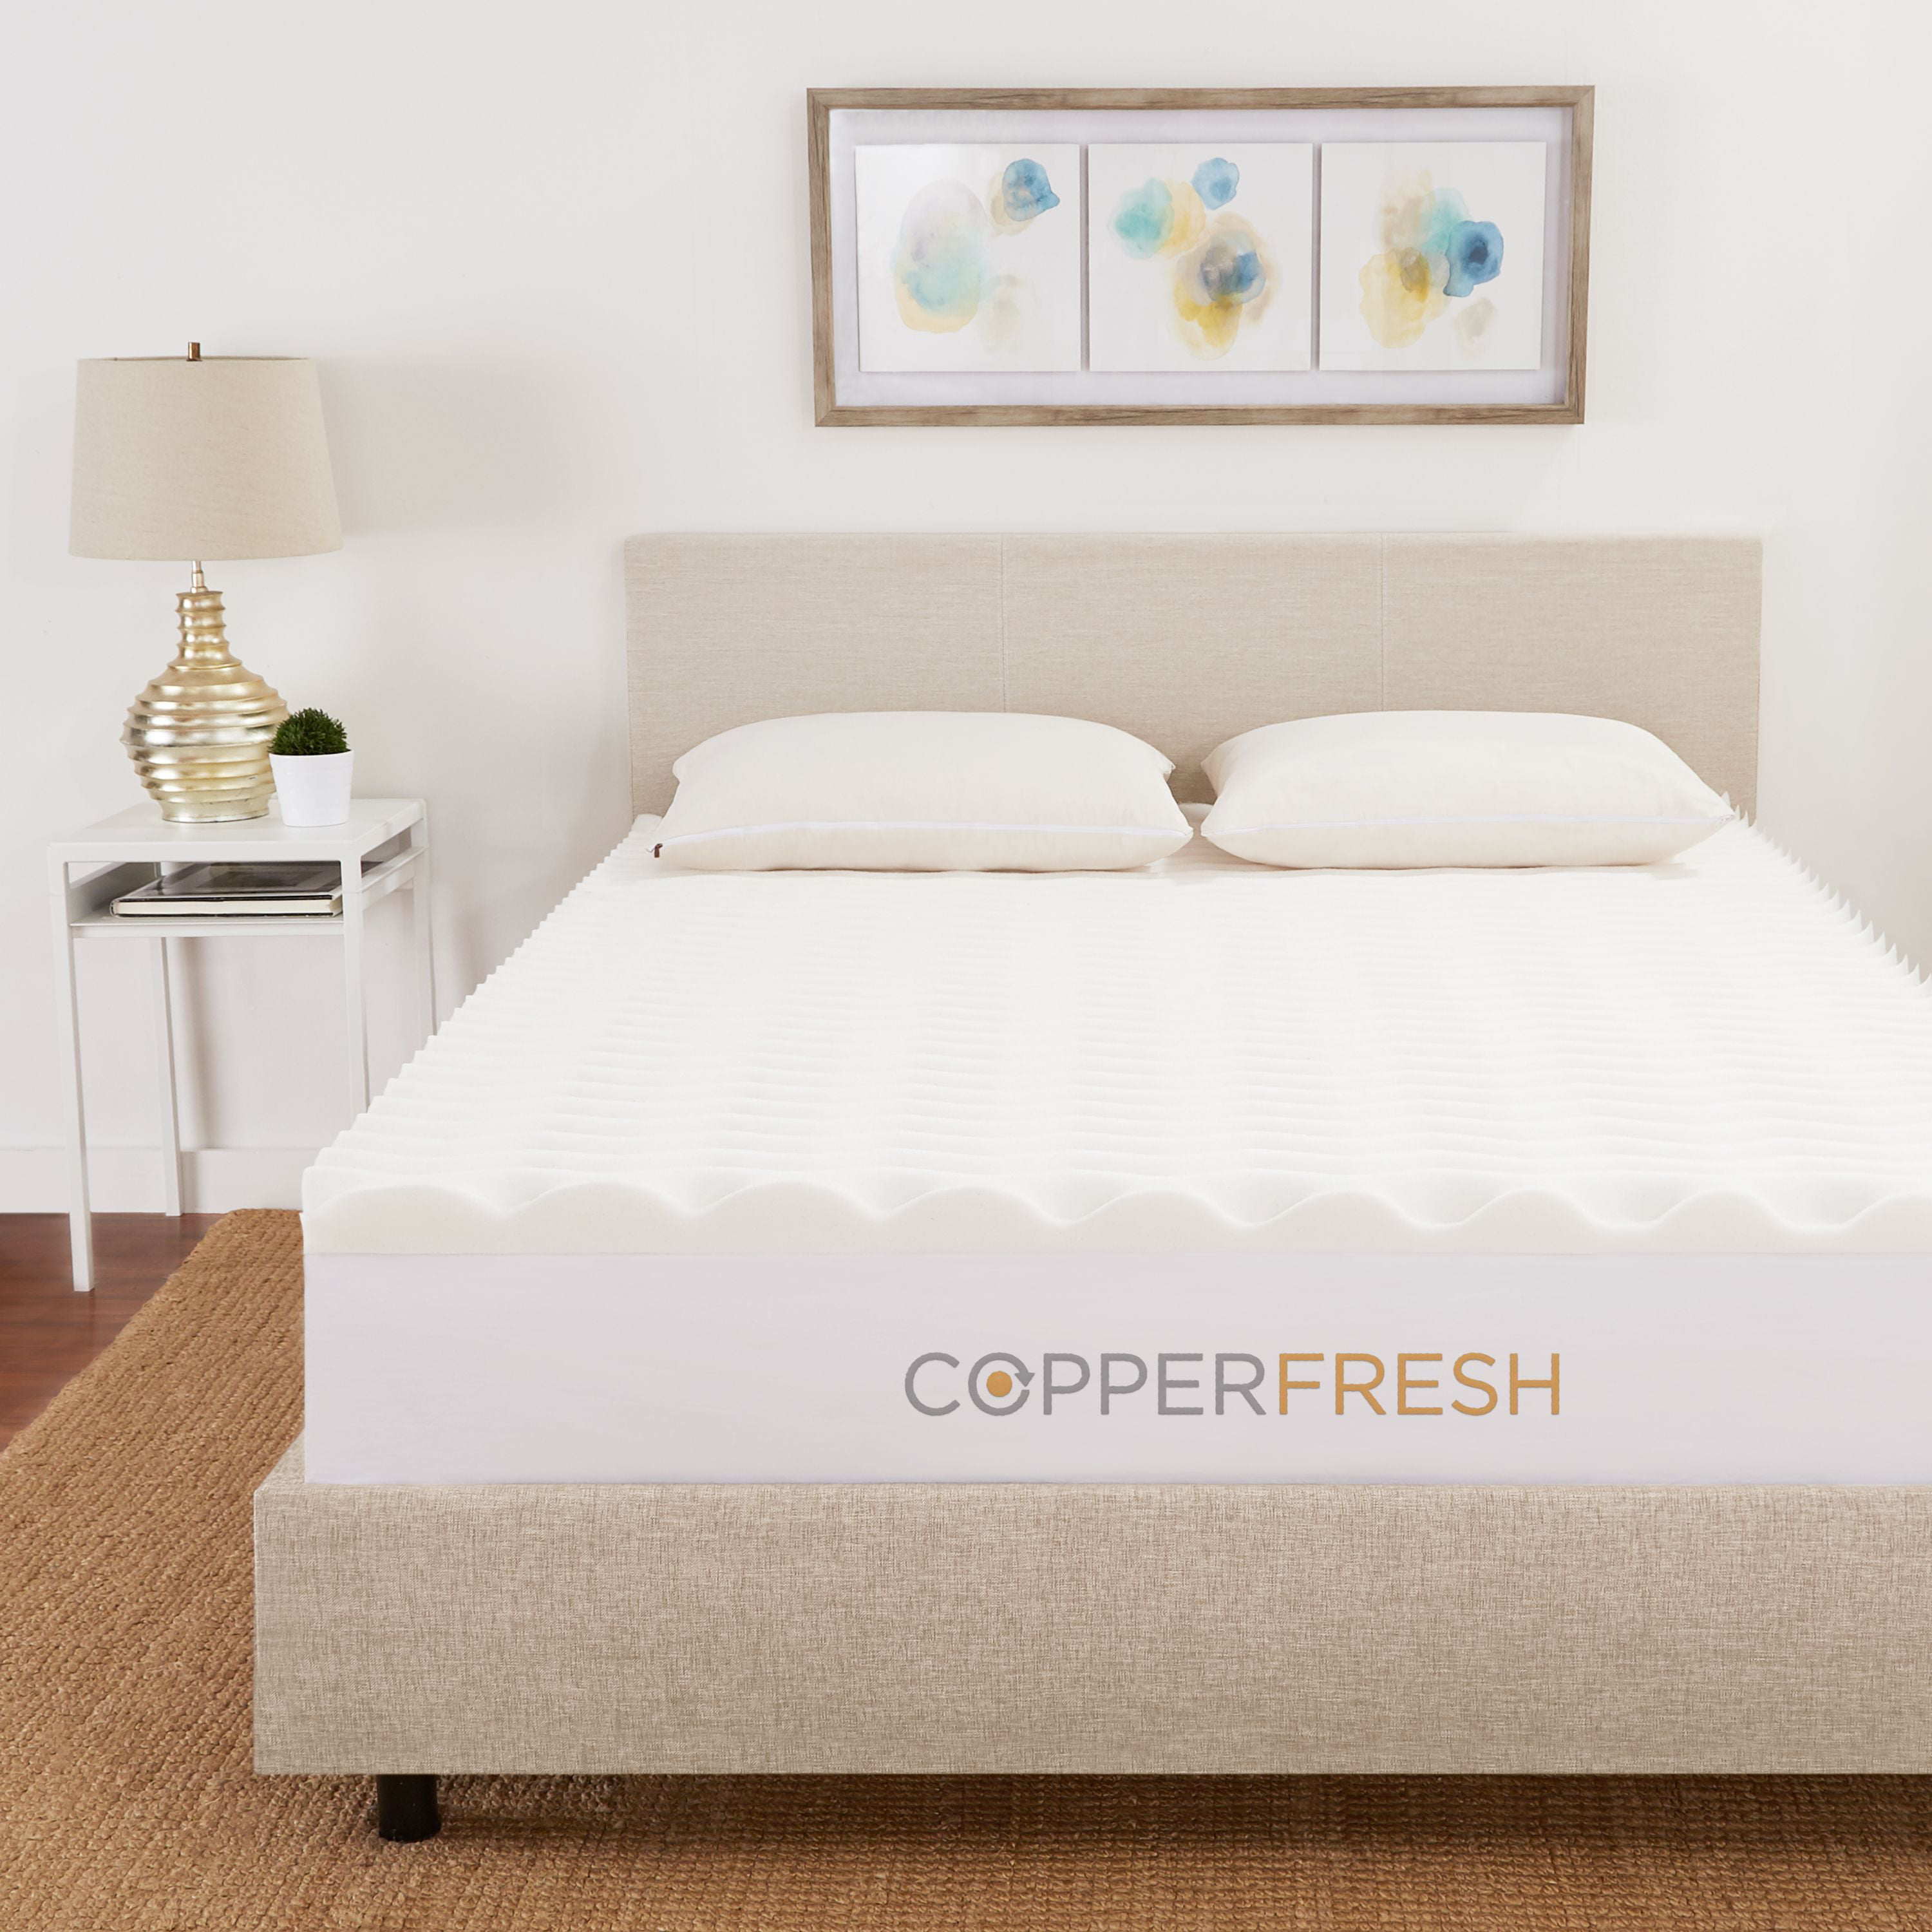 Details about  / 3 Inch Egg Crate Copper Infused Memory Foam Mattress Topper Antimicrobial Fresh